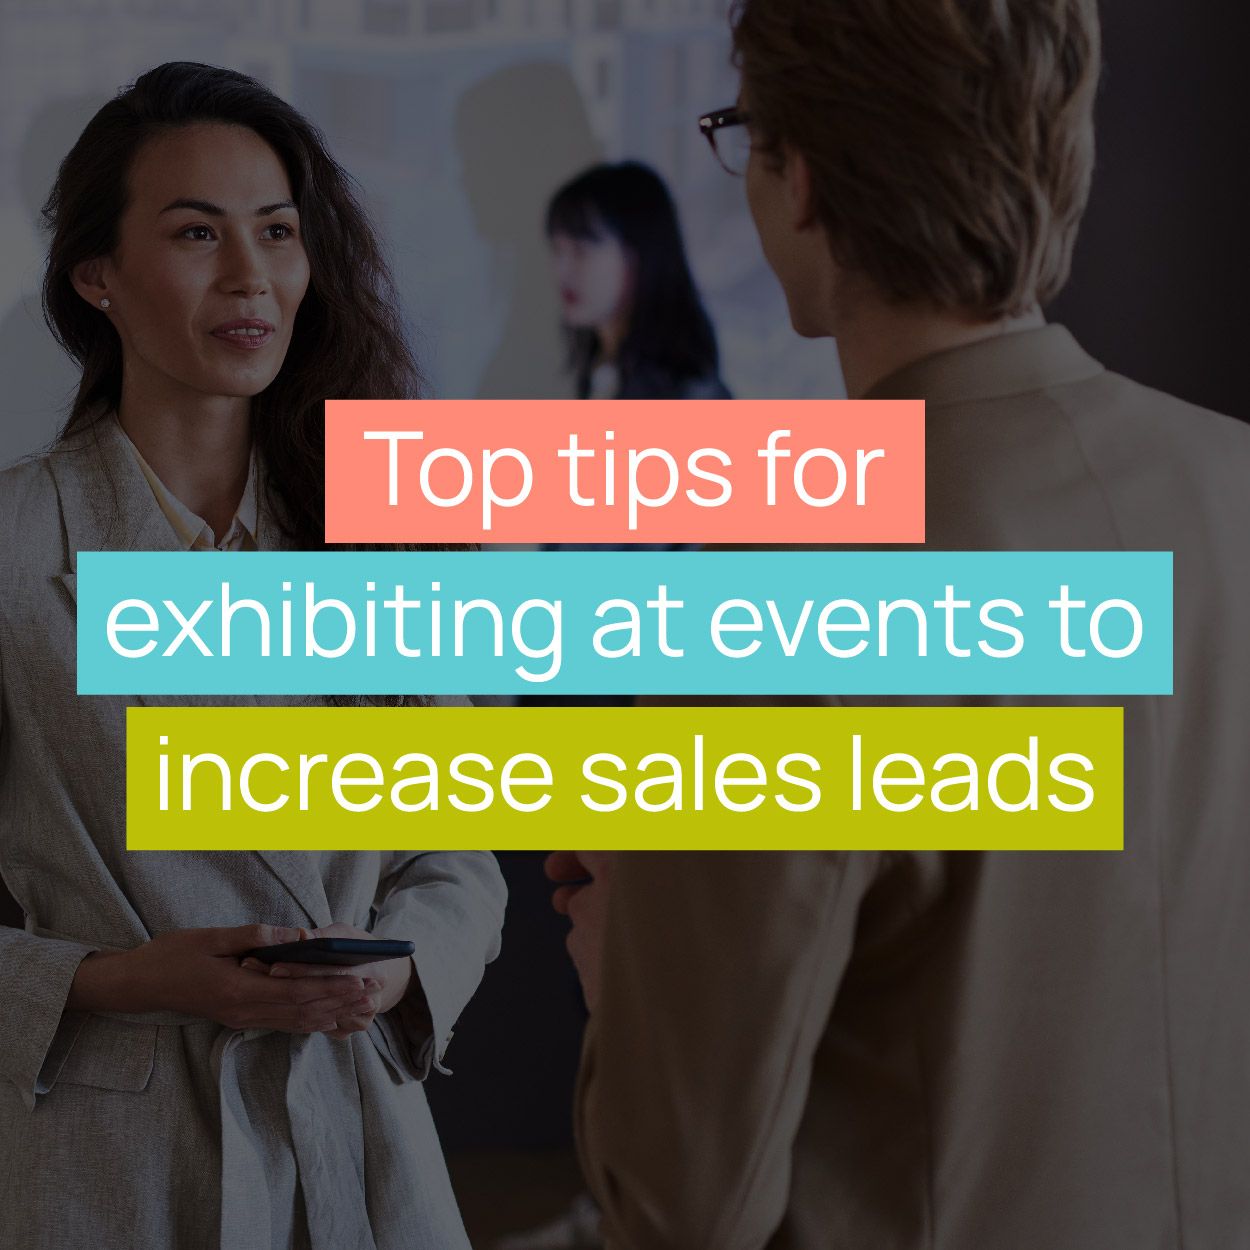 Top tips for exhibiting at events to increase sales leads